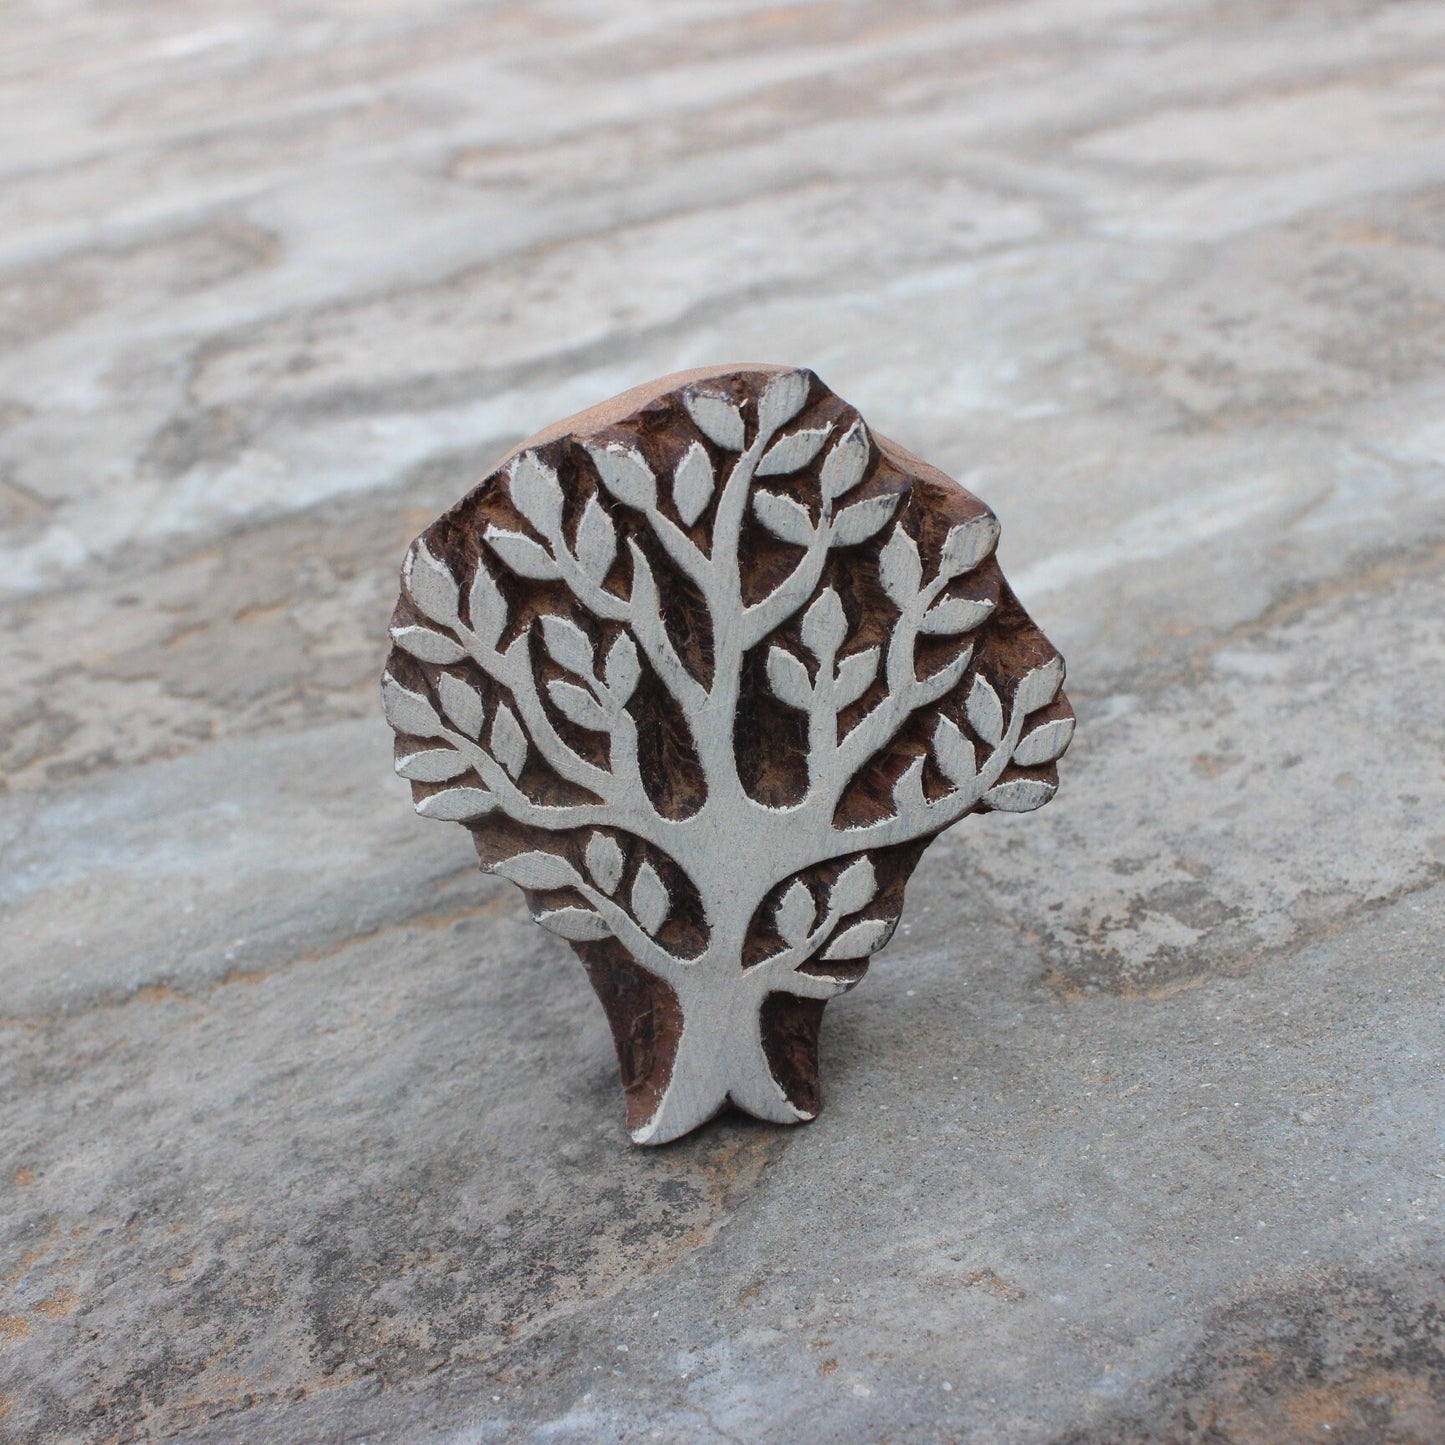 Tree Fabric Block Print Stamp Hand Carved Stamp Indian Wooden Stamp Tree Of Life Wood Block Stamp For Printing Hand Carve Soap Making Stamp